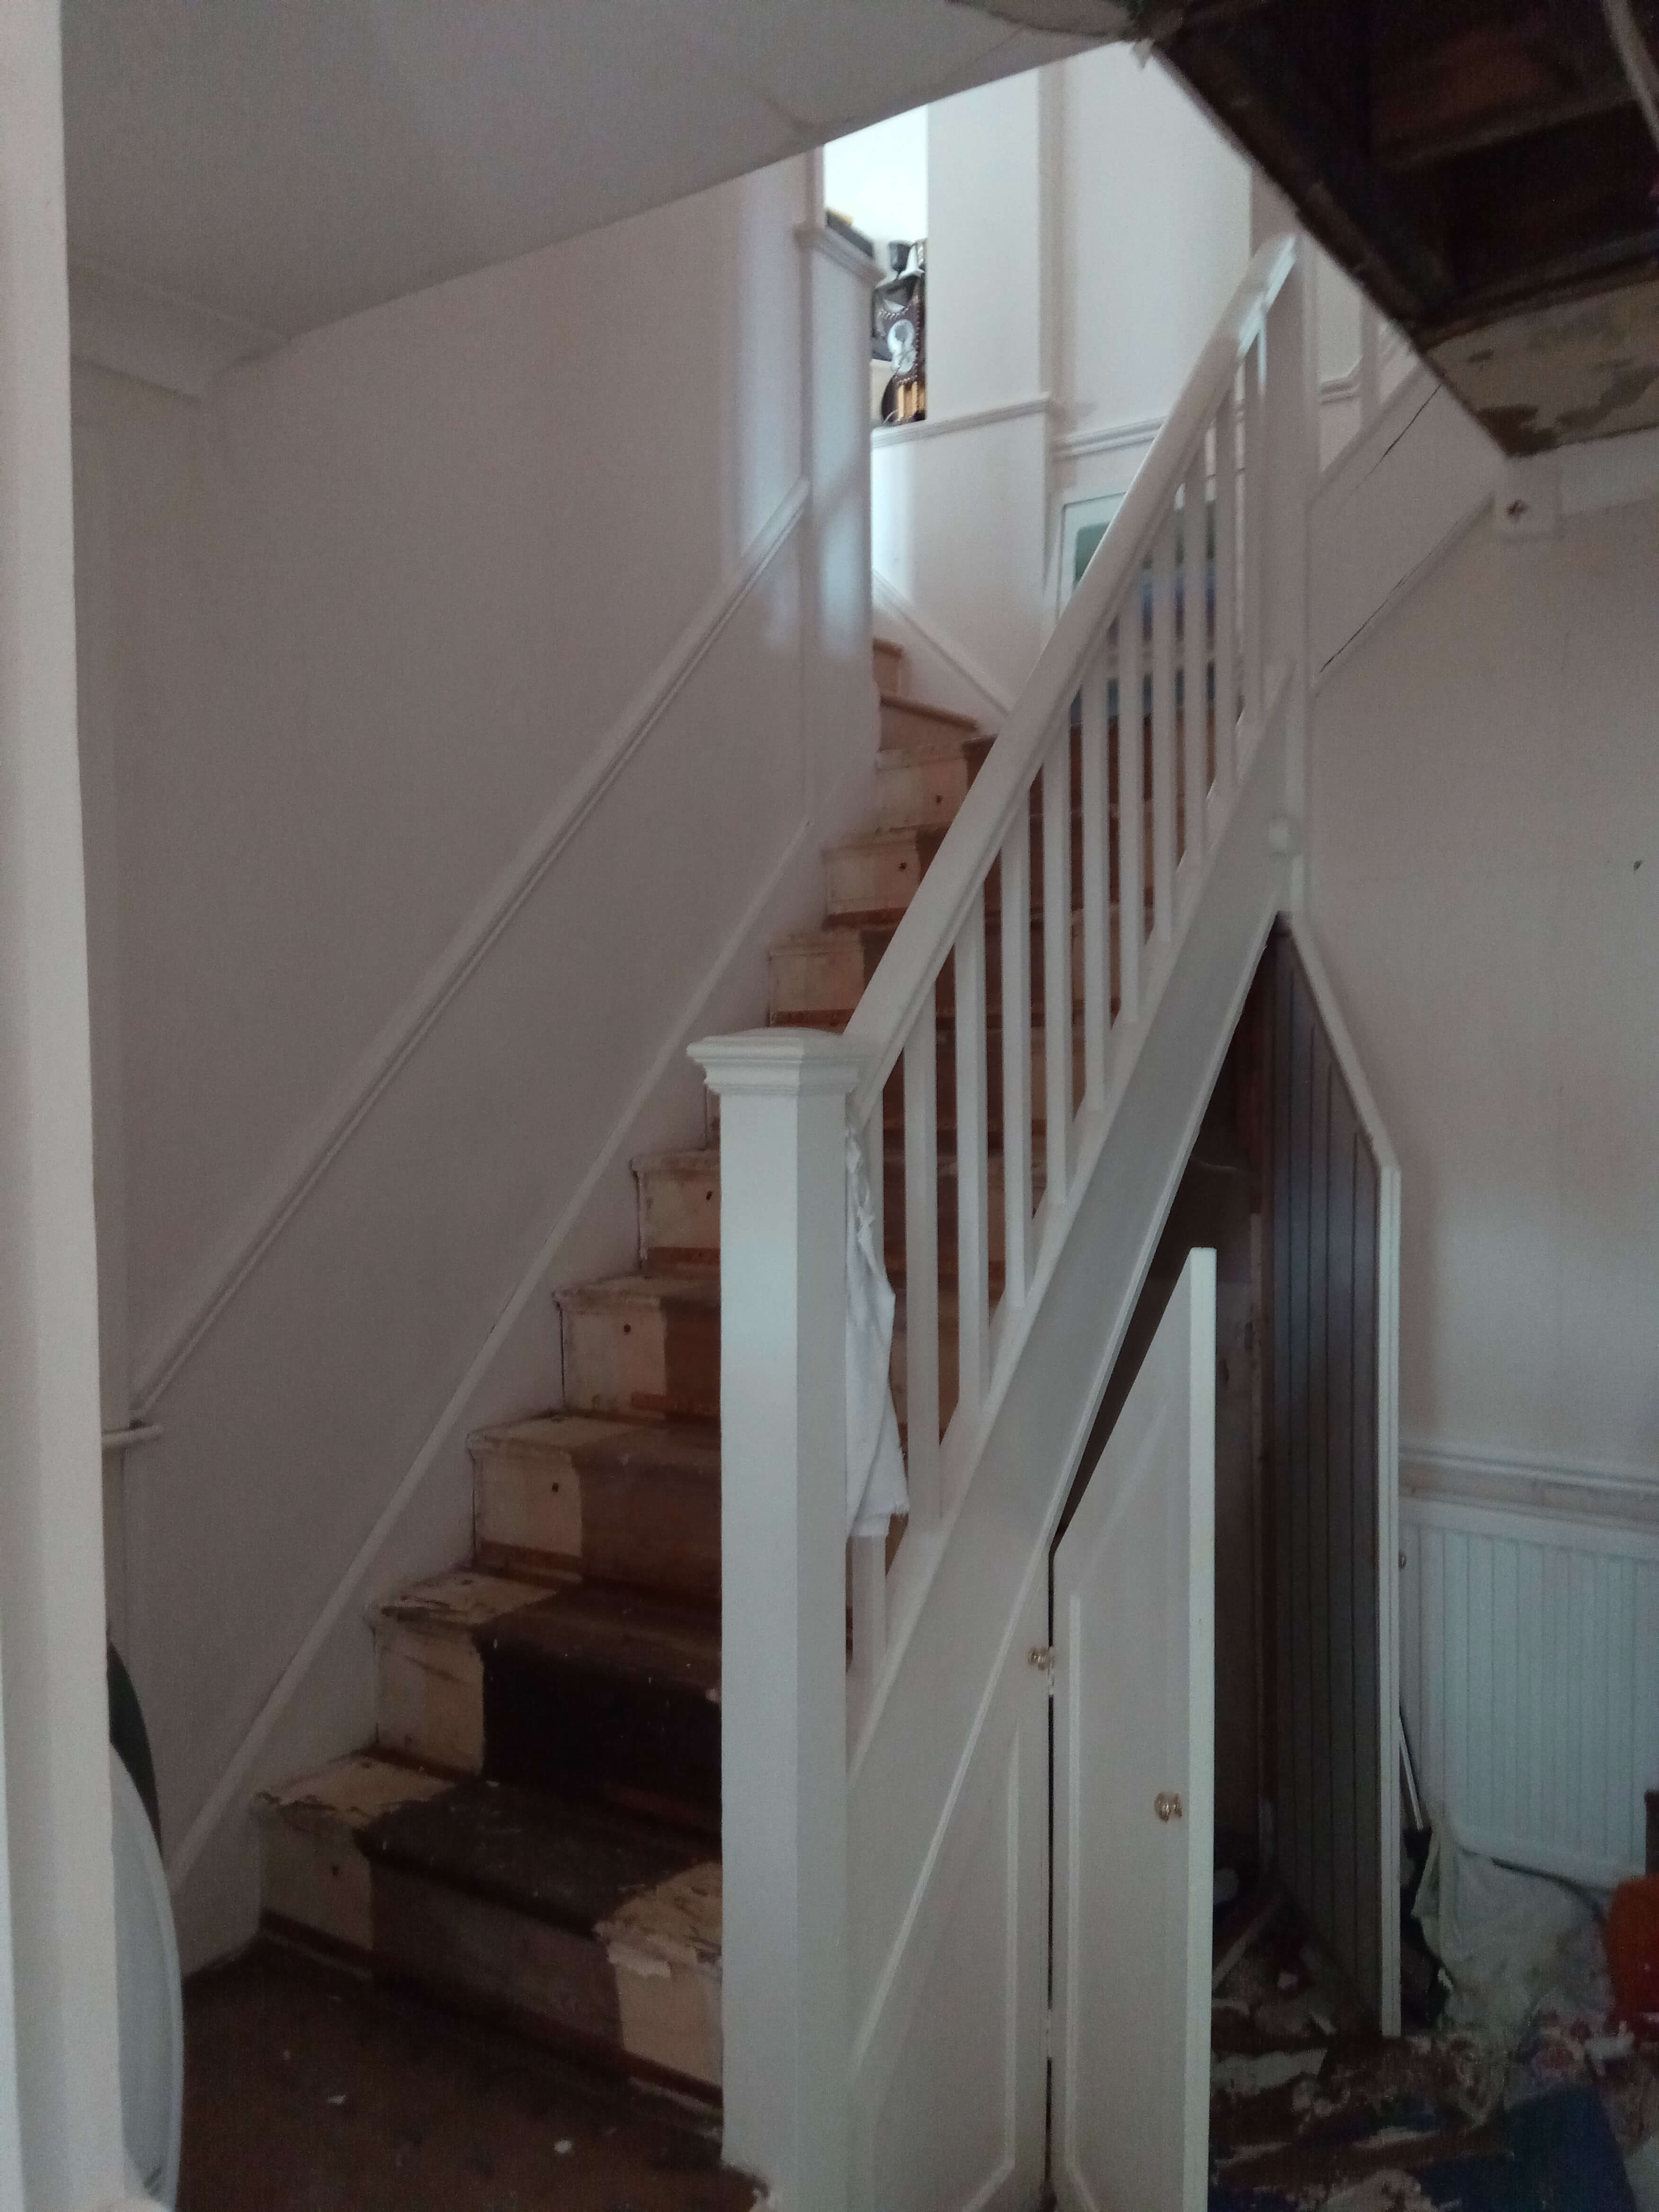 water damage to staircase